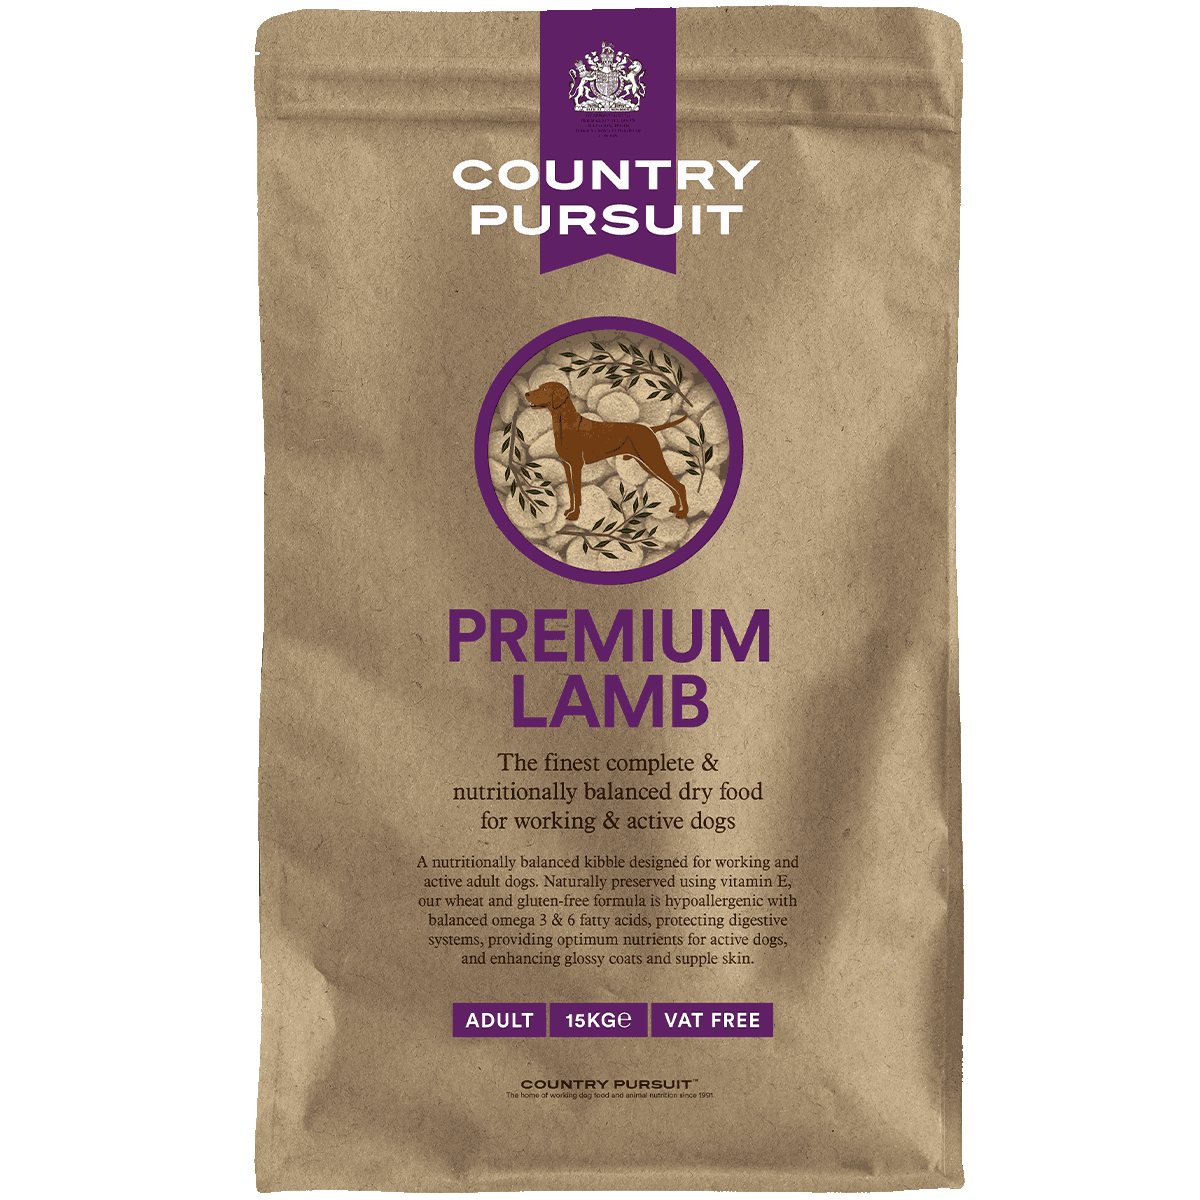 Country Pursuit Premium Lamb, Rice, and Tripe - A nutritionally balanced kibble developed, trialled, and tested by working dog experts. Trusted for years, it meets the nutritional needs of adult dogs